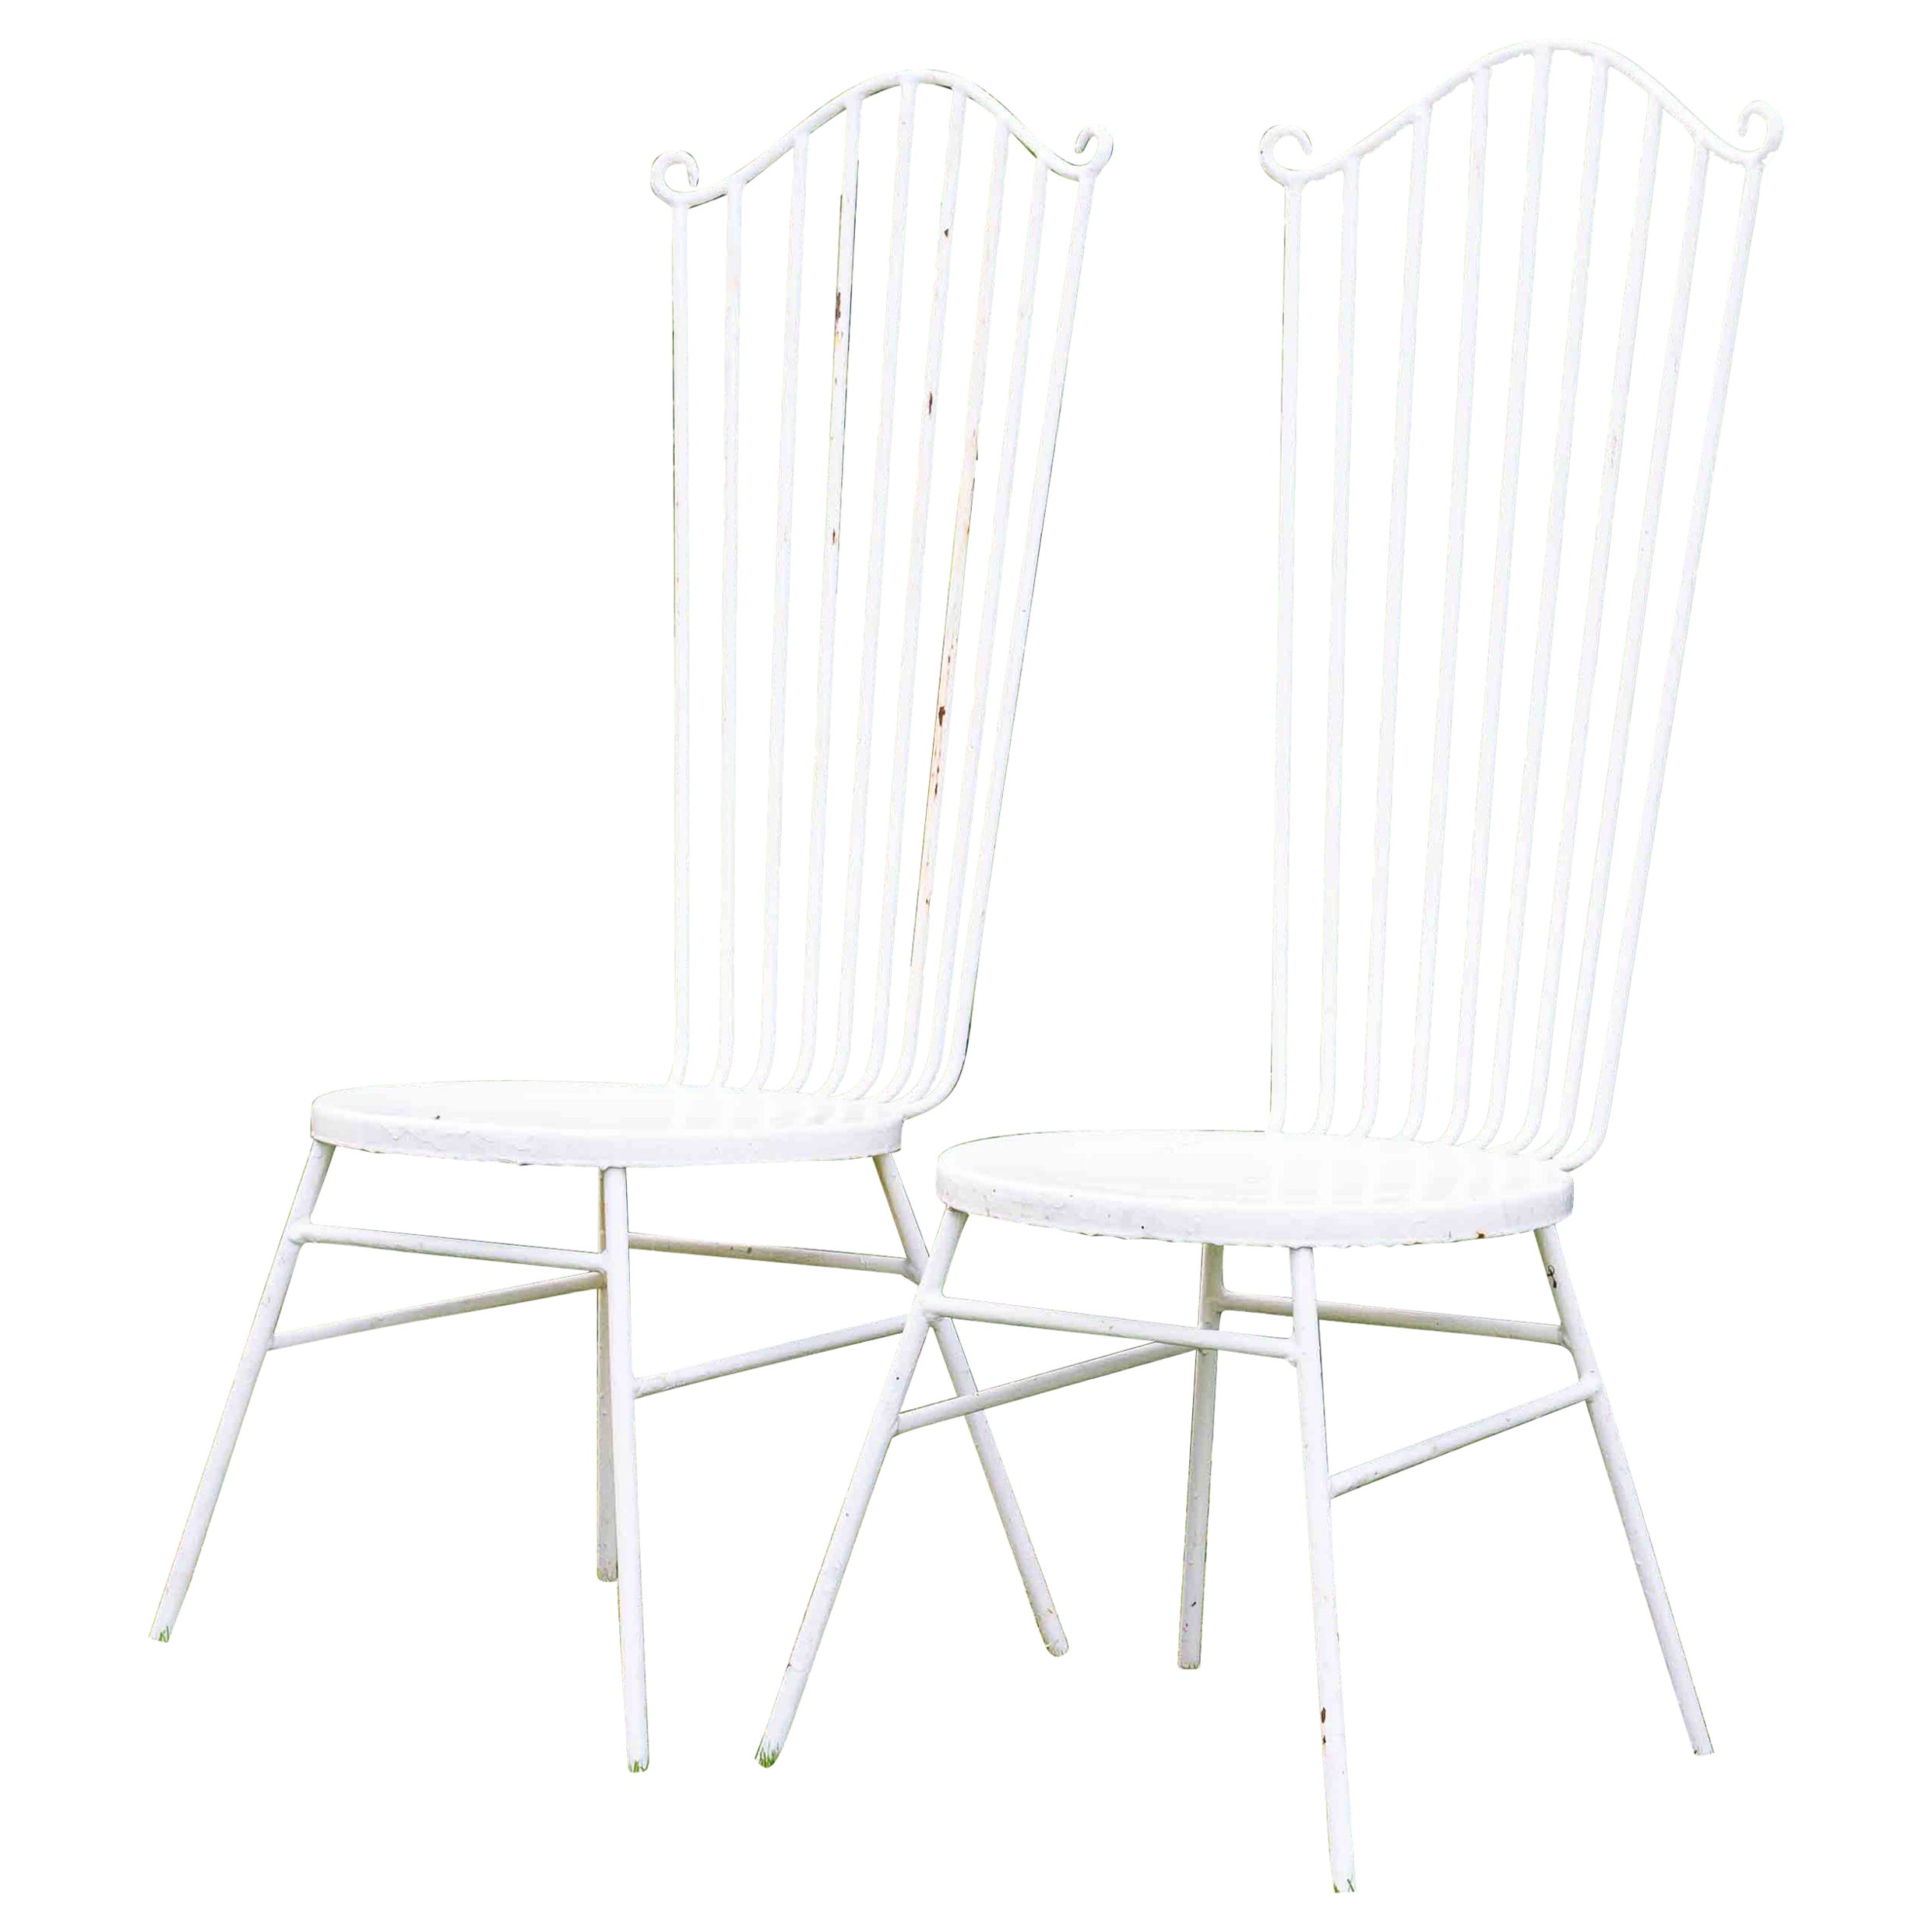 Midcentury Vintage Iron Garden Chairs, 1950s For Sale